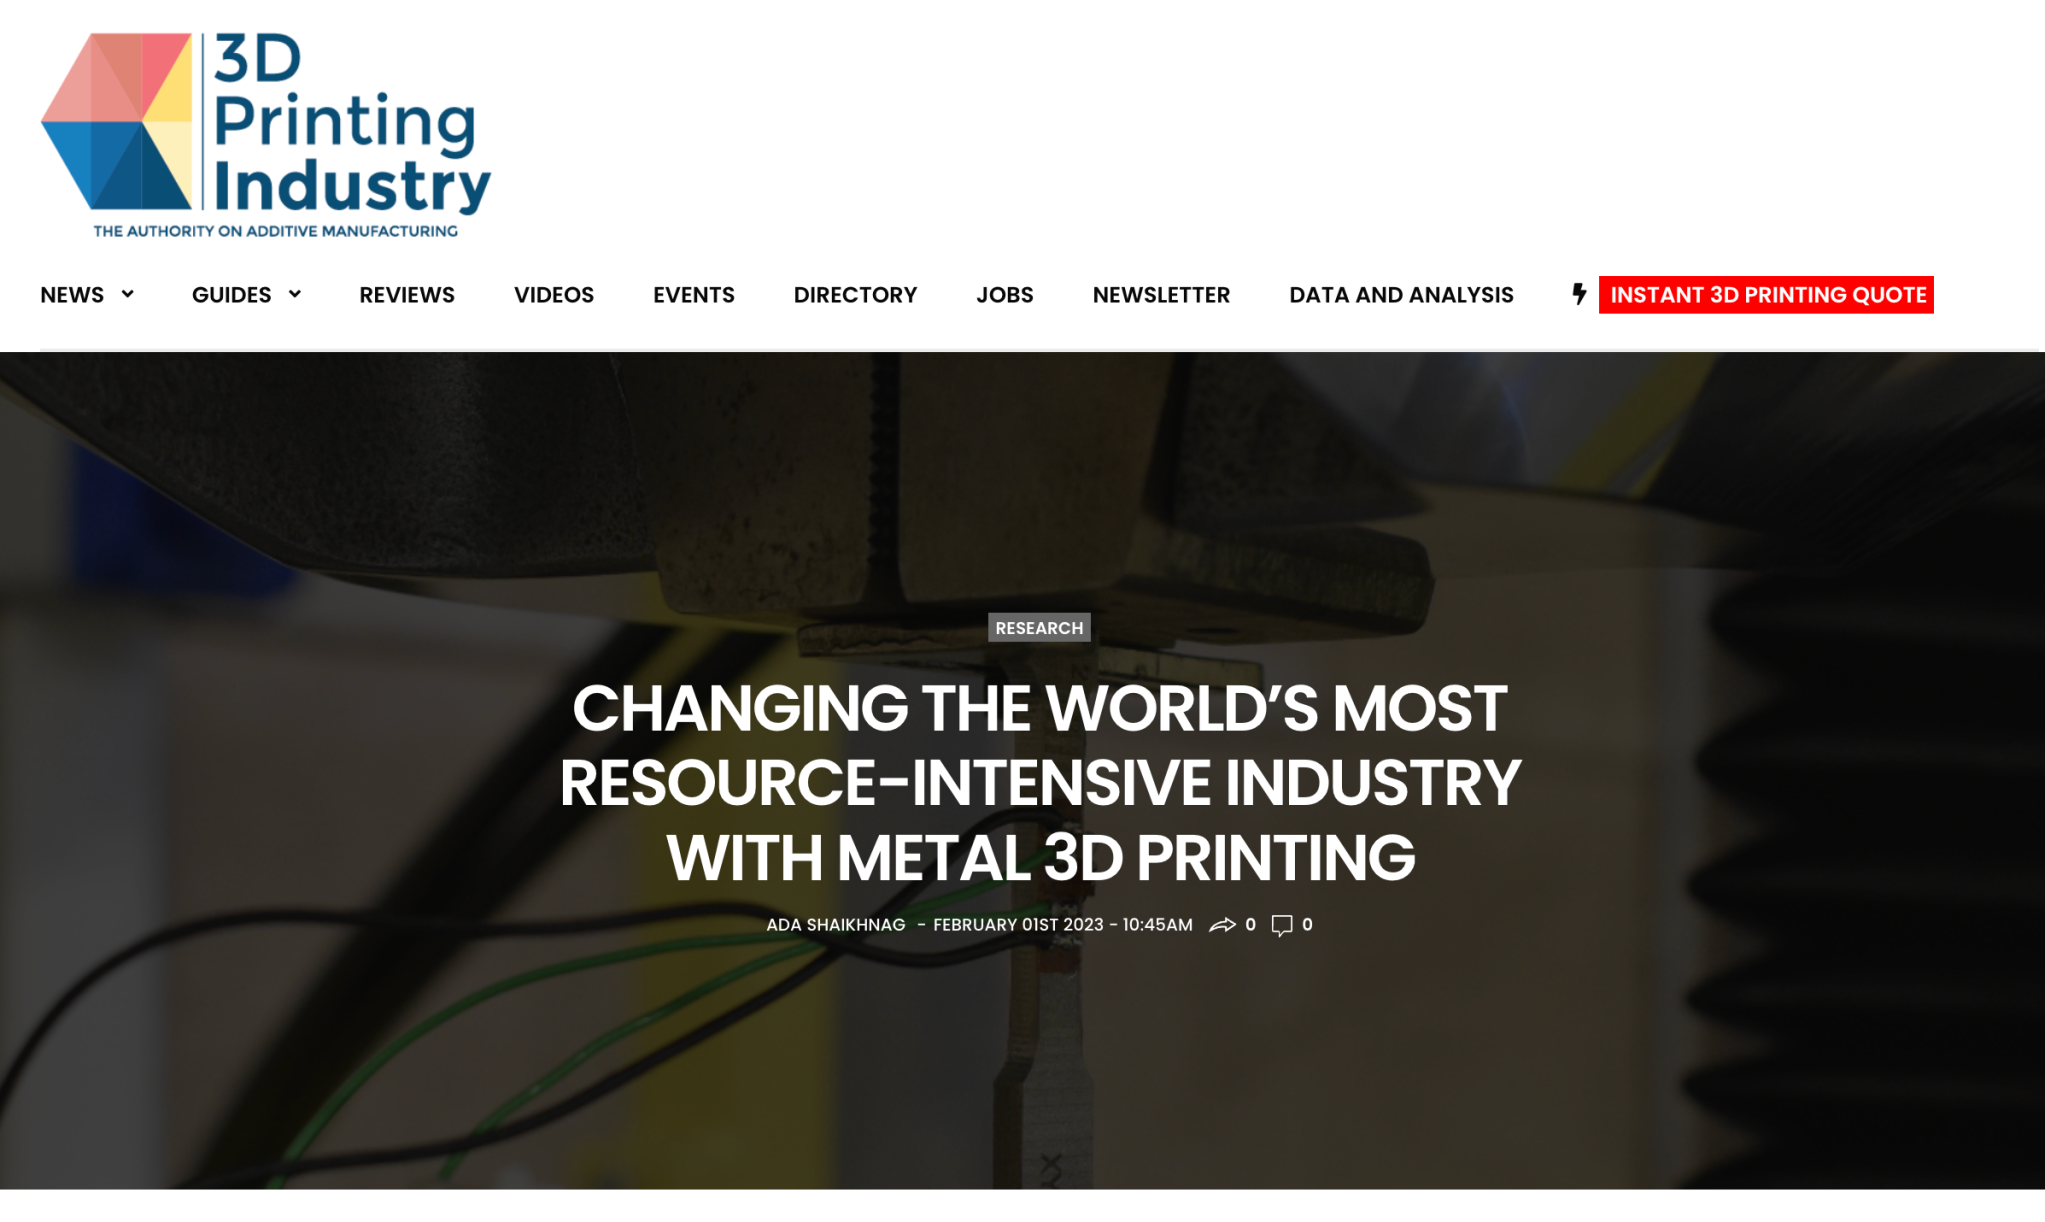 Changing the world’s most resource-intensive industry with metal 3D printing